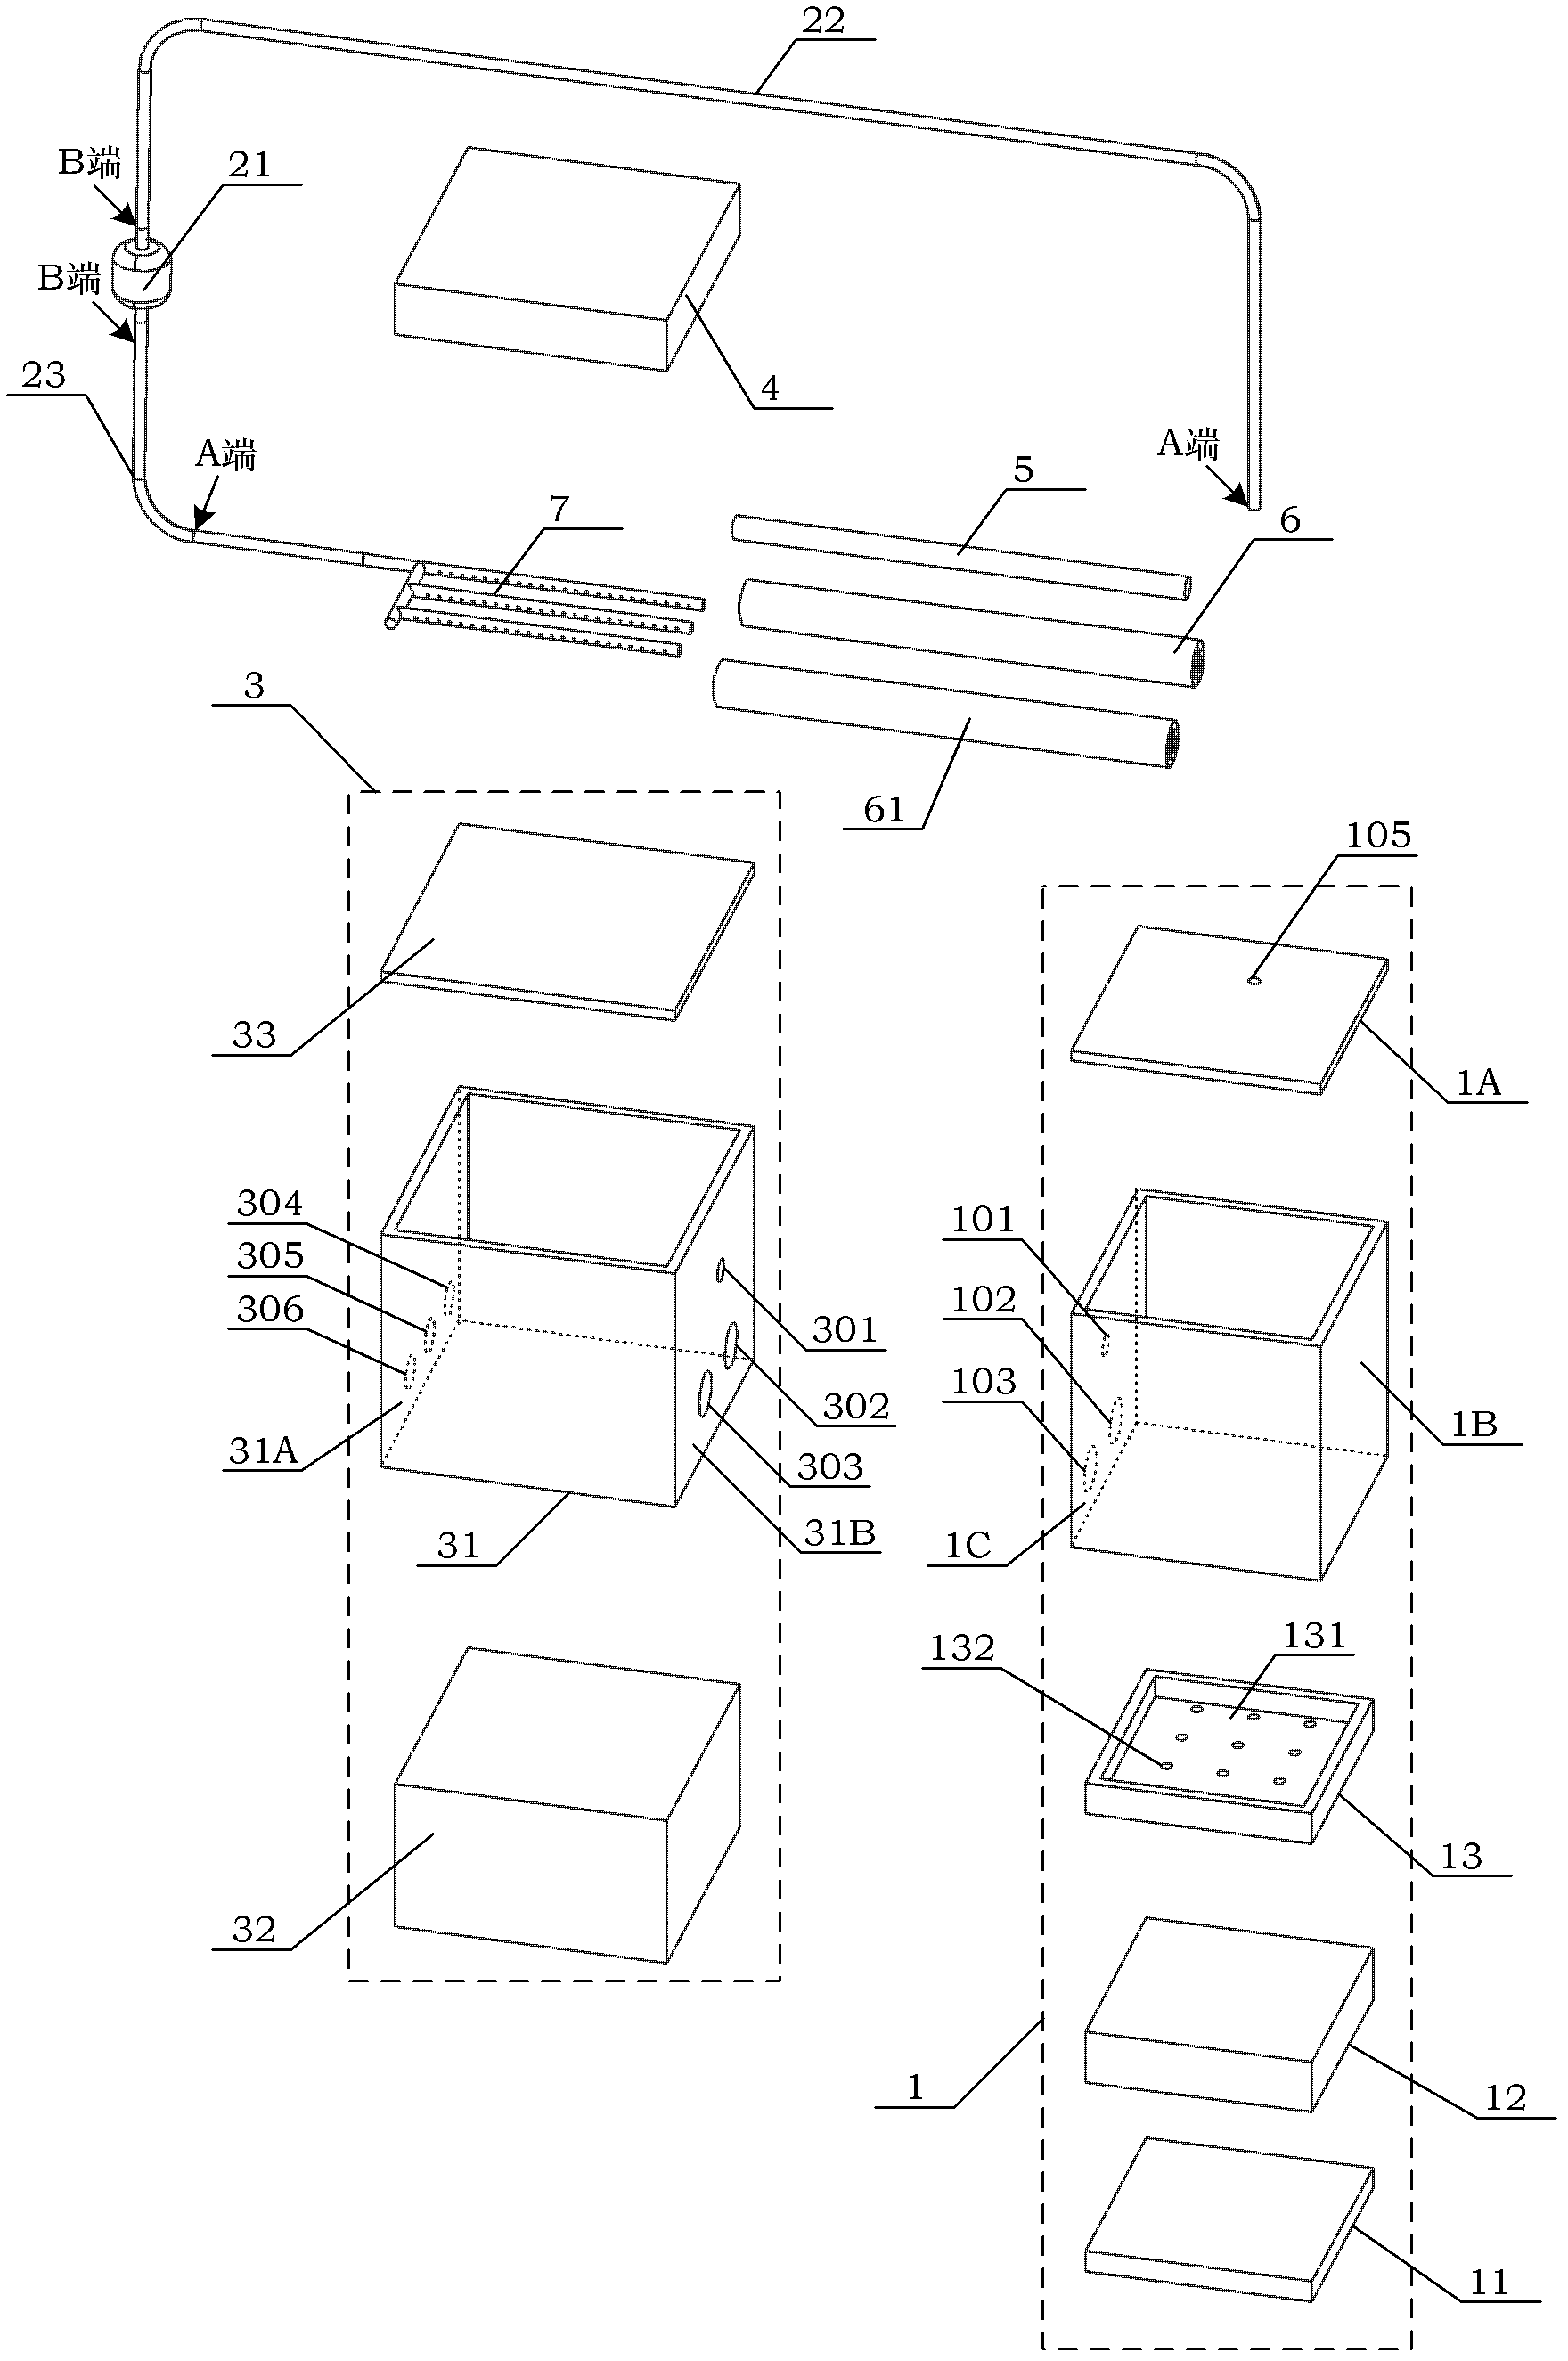 Microgravity environment-based spray cooling loop device